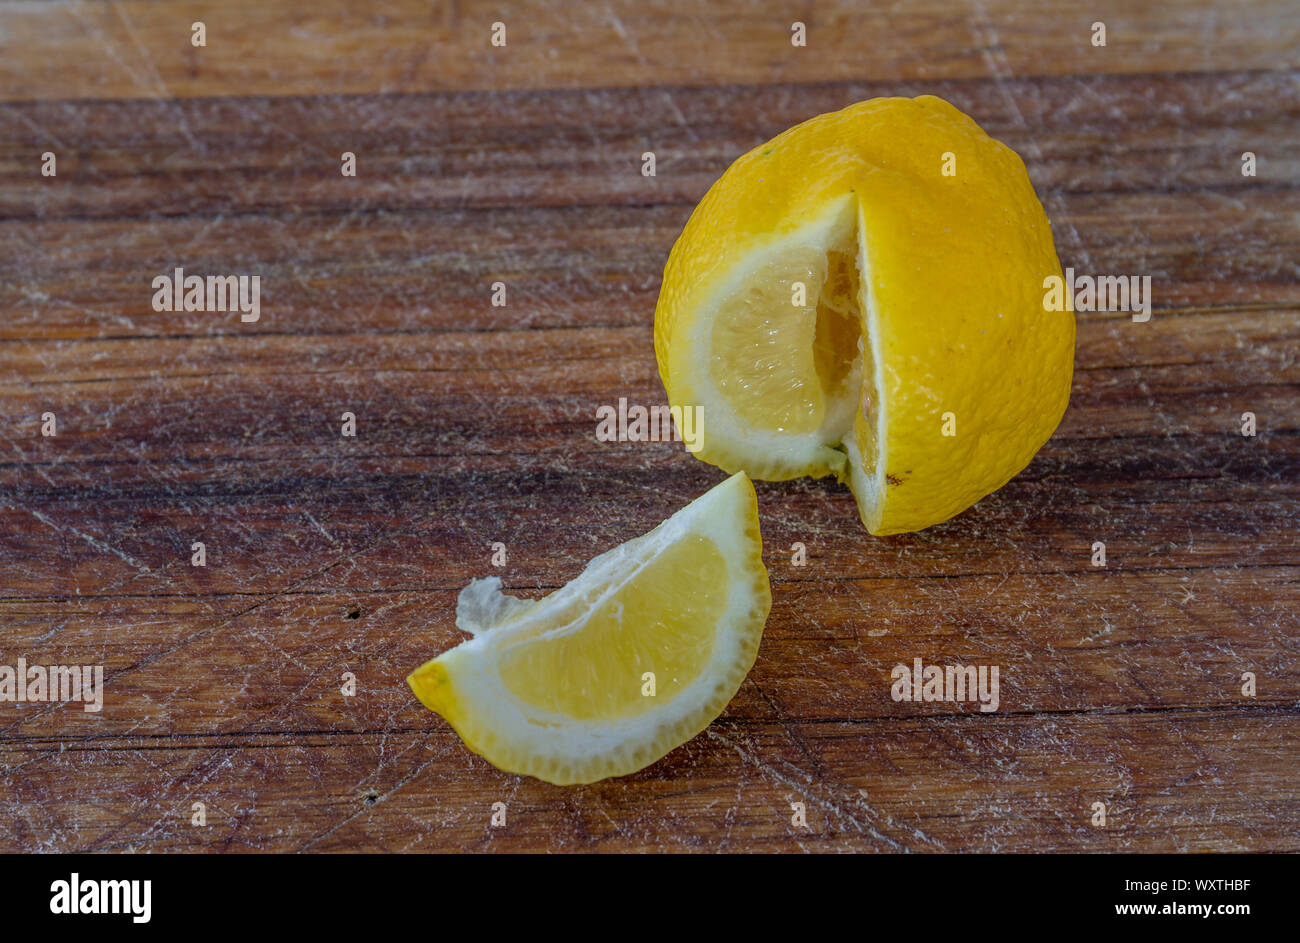 A slice of lemon and the remainder of the fruit isolated on a wooden surface image with copy space Stock Photo